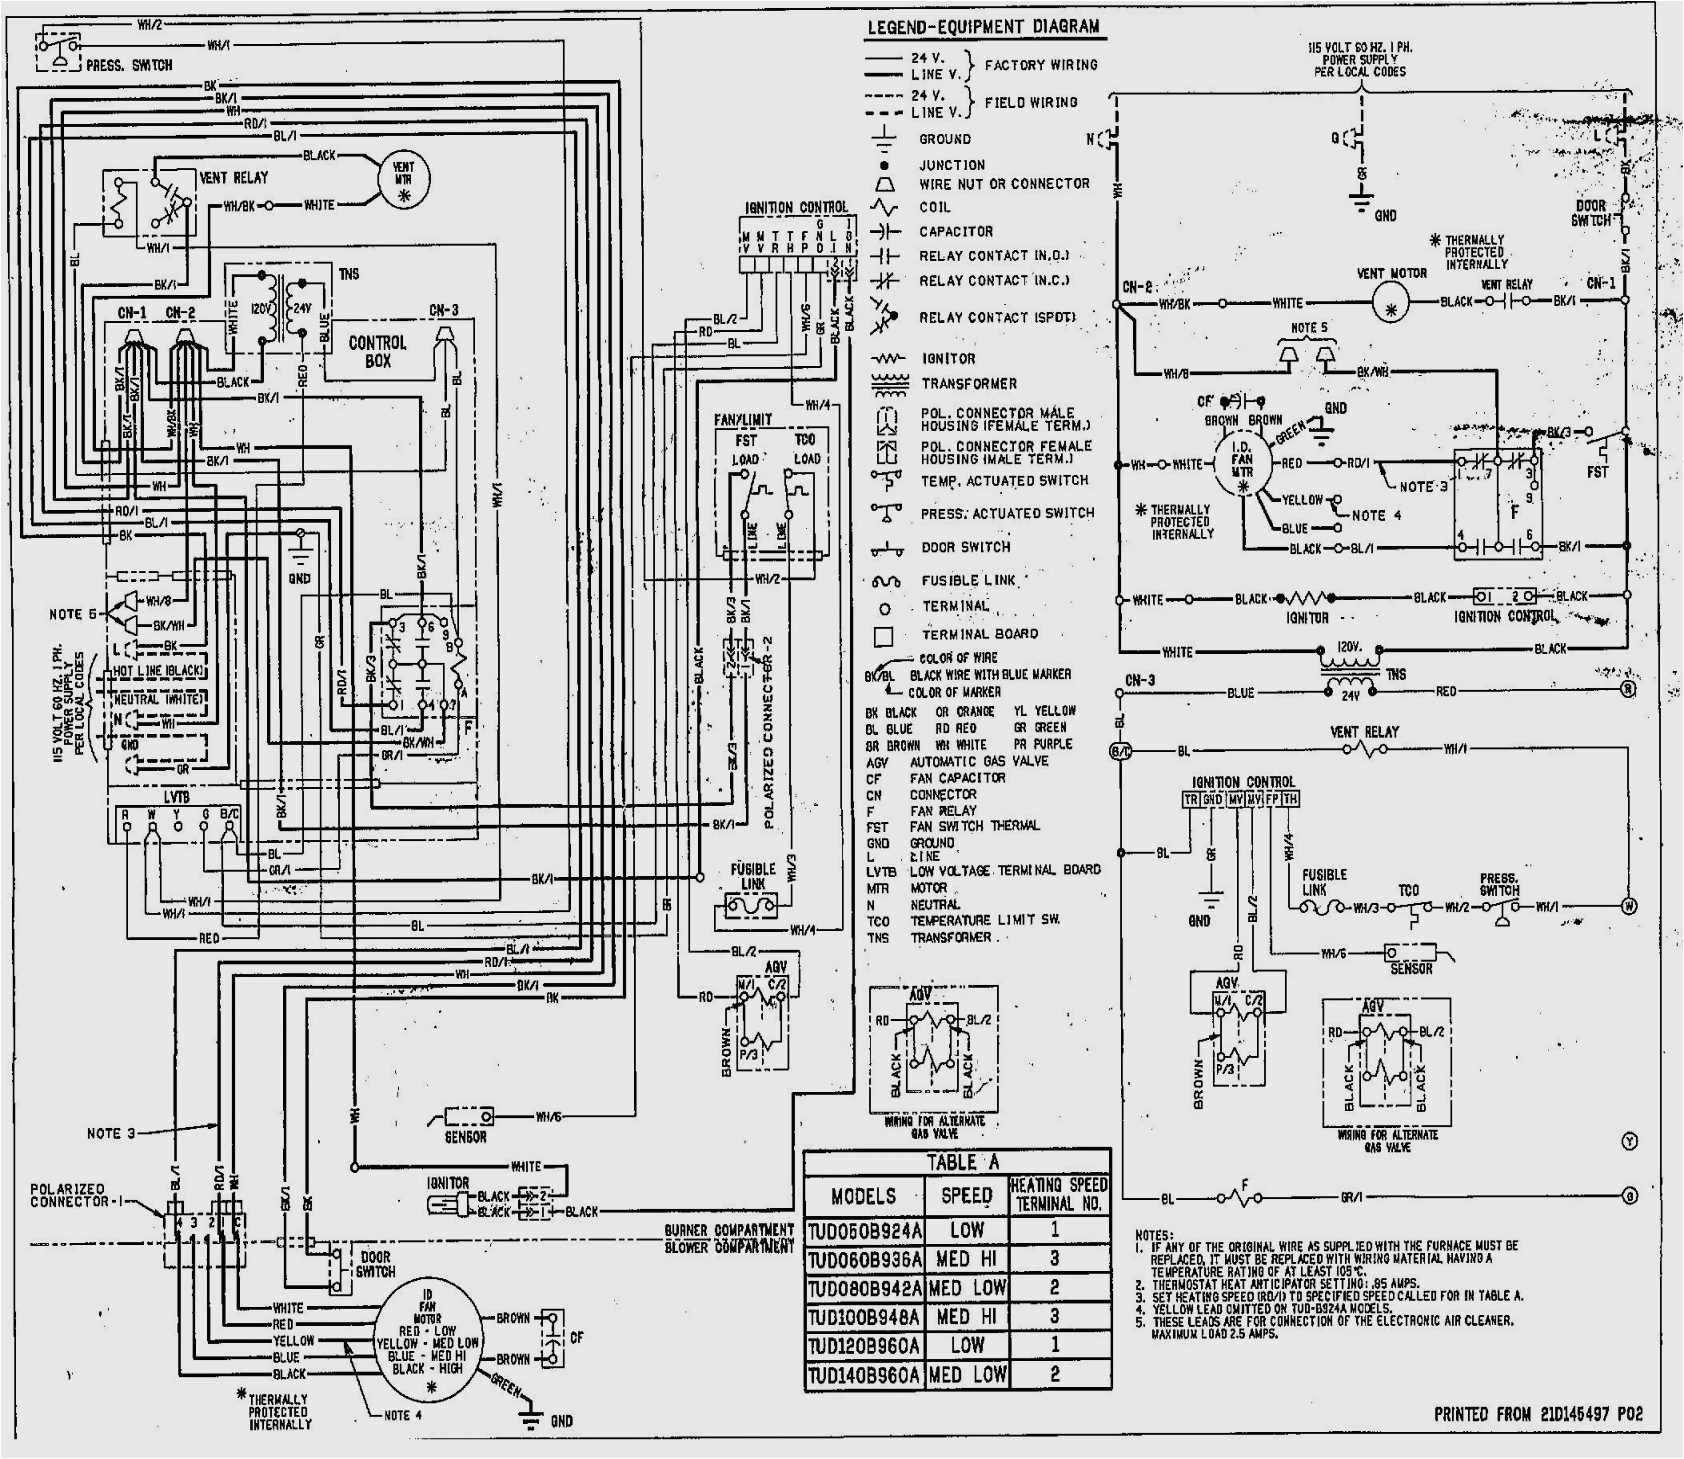 carrier infinity wiring diagram carrier furnace wiring wiring diagram will be a thing e280a2 of carrier infinity wiring diagram 4 jpg